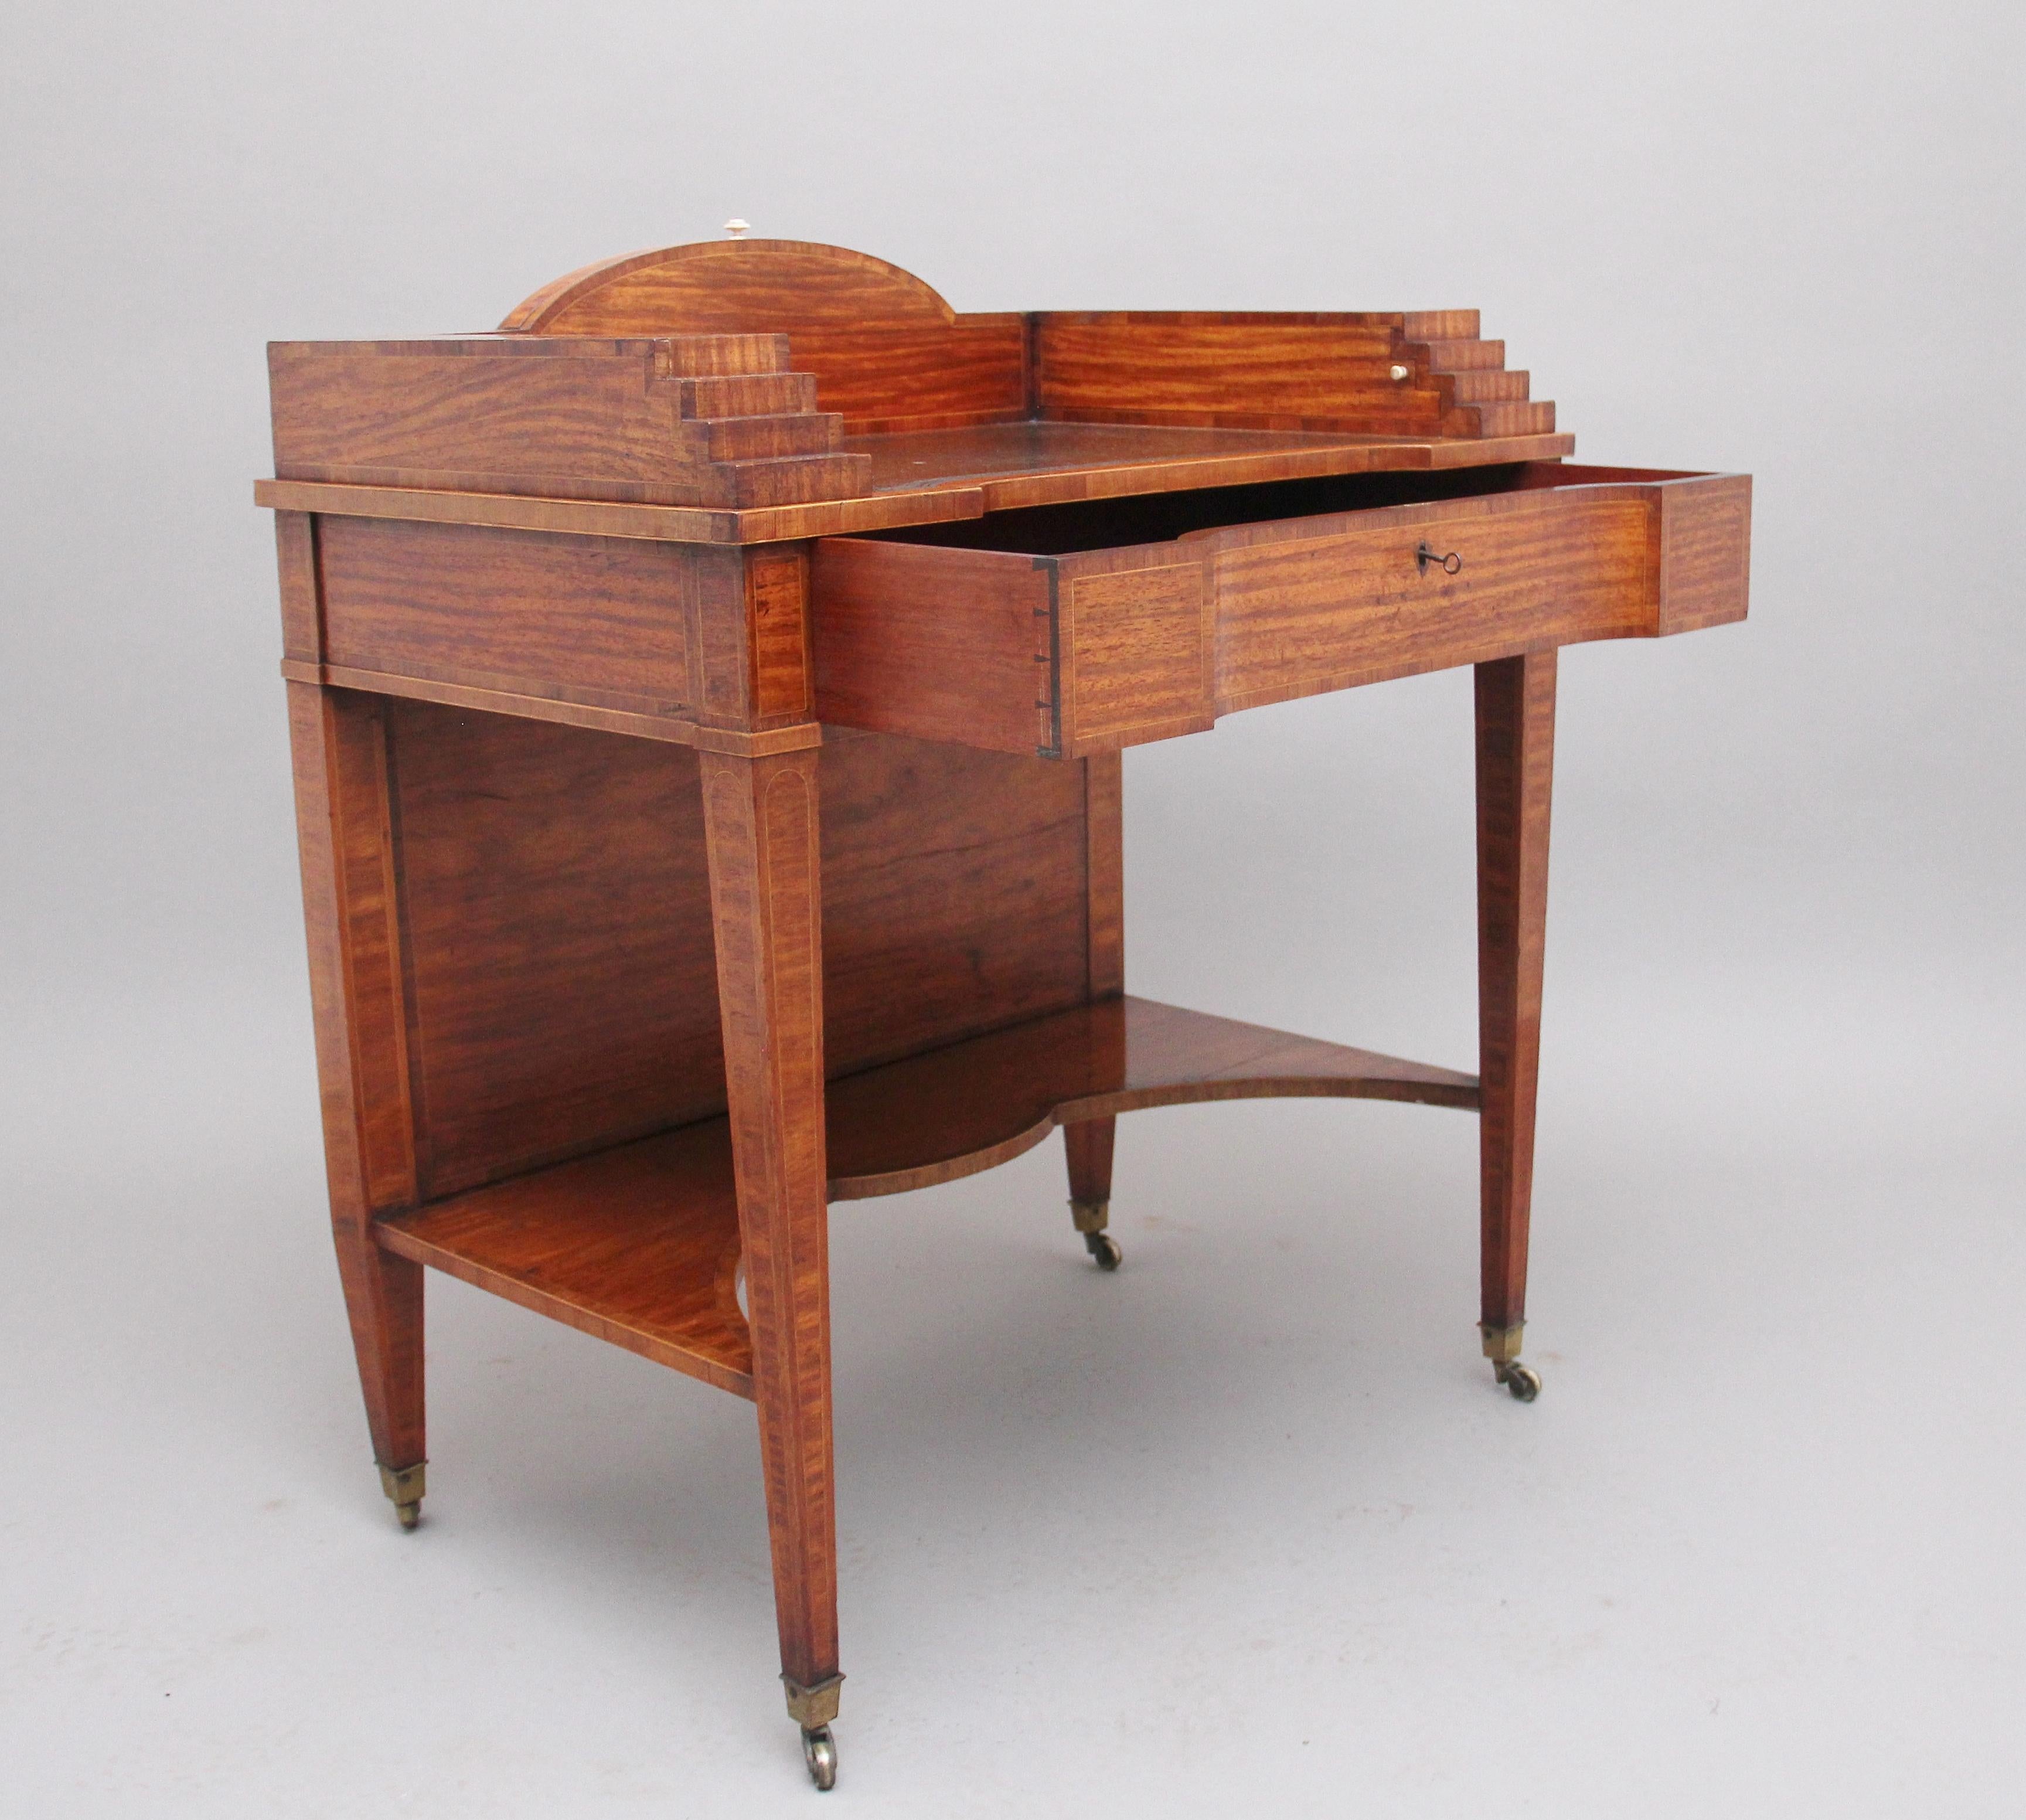 19th century satinwood ladies writing table in the Sheraton style, having a shaped leather writing surface decorated with blind tooling, decorative stepped sides which has secret pull out compartments either side to reveal a pen tray on one side and